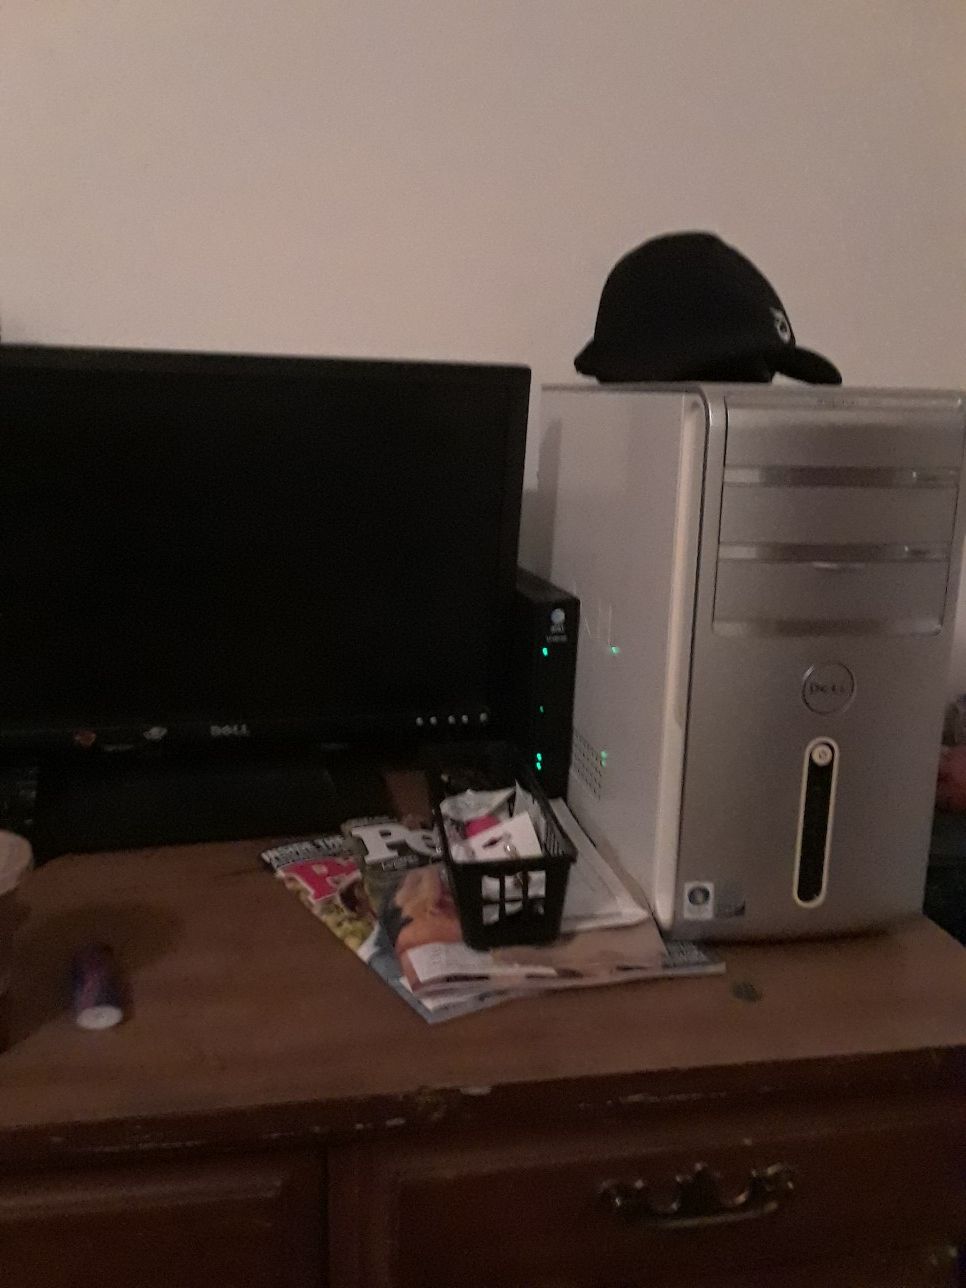 older computer works great for Facebook and Facebook gaming it's been cleaned up and is ready to go BF is a IT guy so it's free of viruses etc